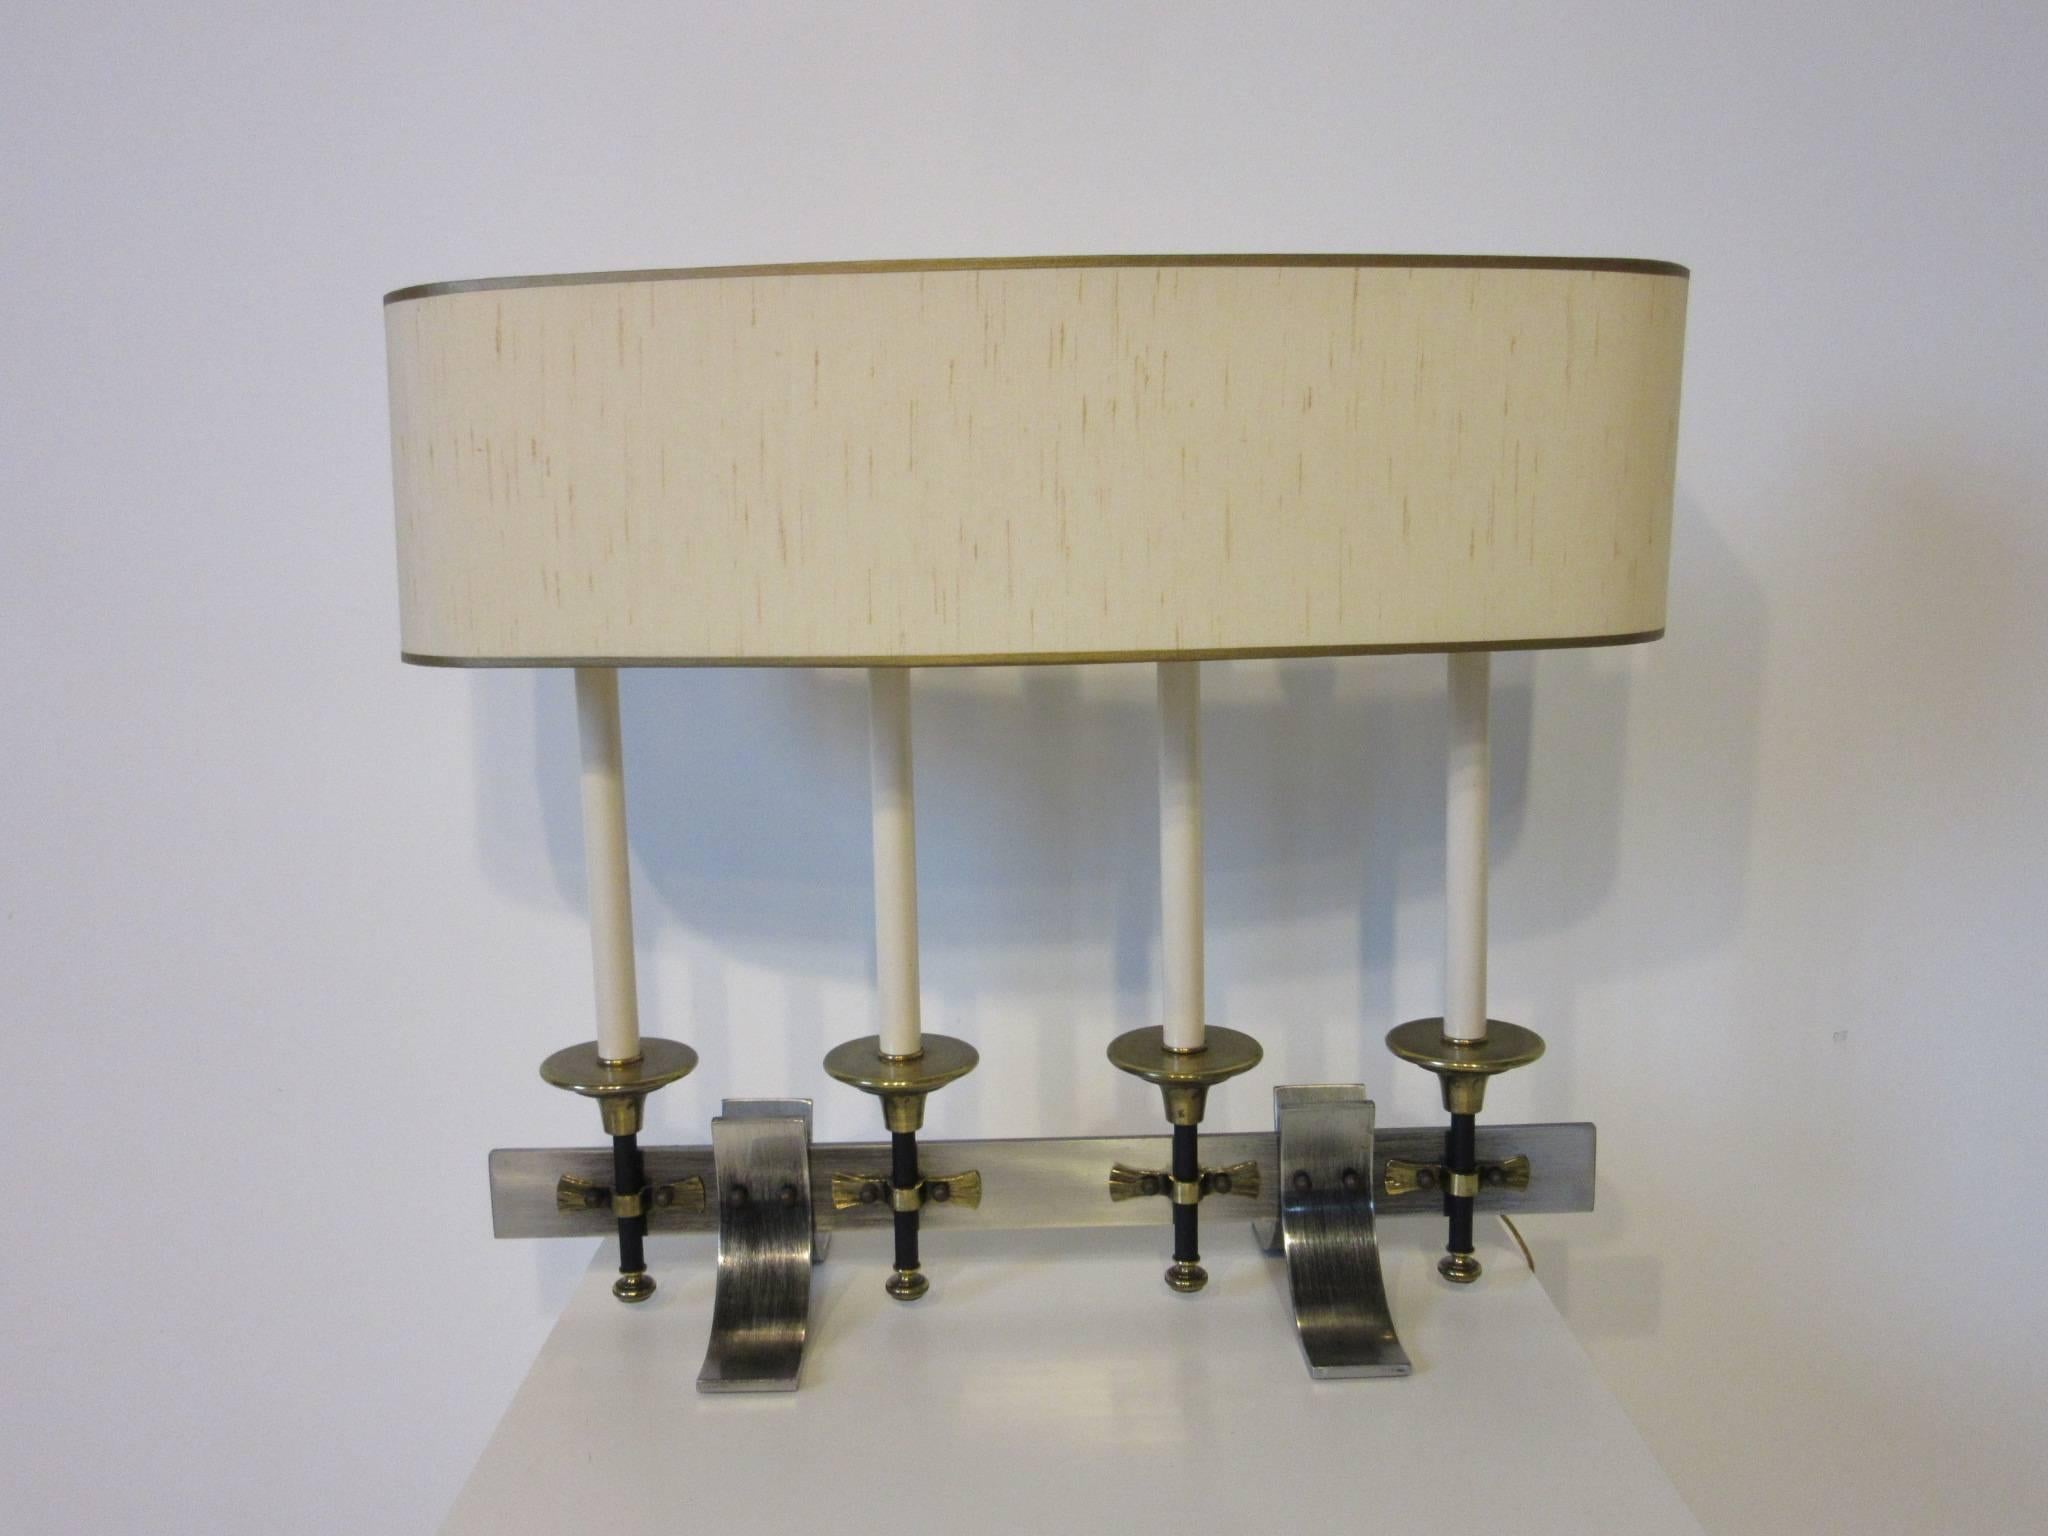 Brass / Brushed Metal Table Lamp in the style of Stiffel and Parzinger For Sale 3